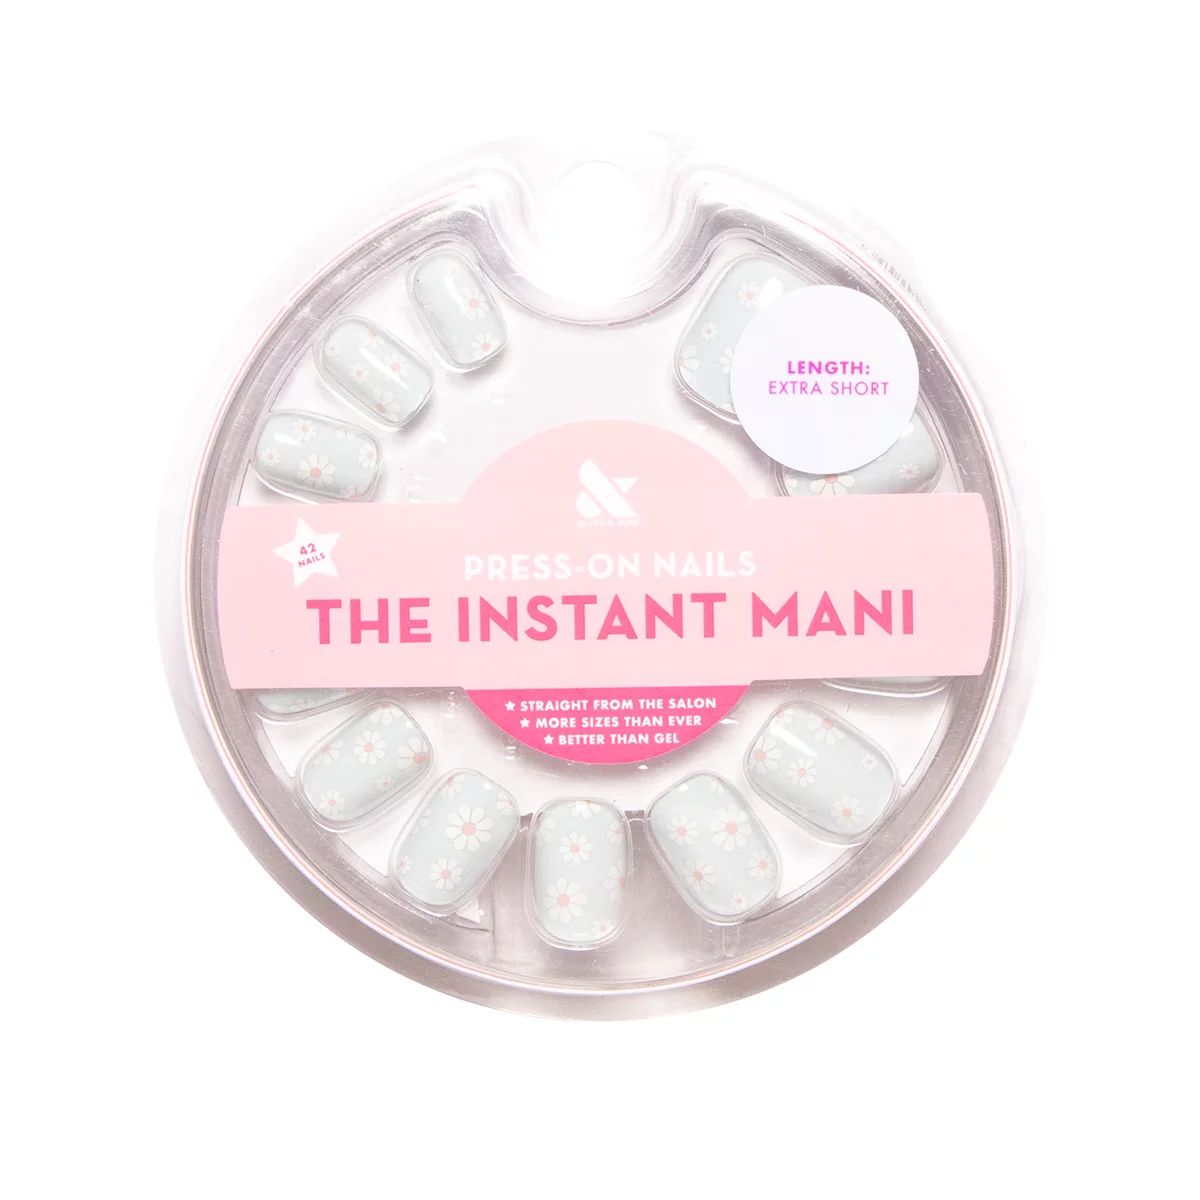 Olive & June Instant Mani Squoval Extra Short Press-On Nails, Blue Flower Shower, 42 Pieces | Walmart (US)